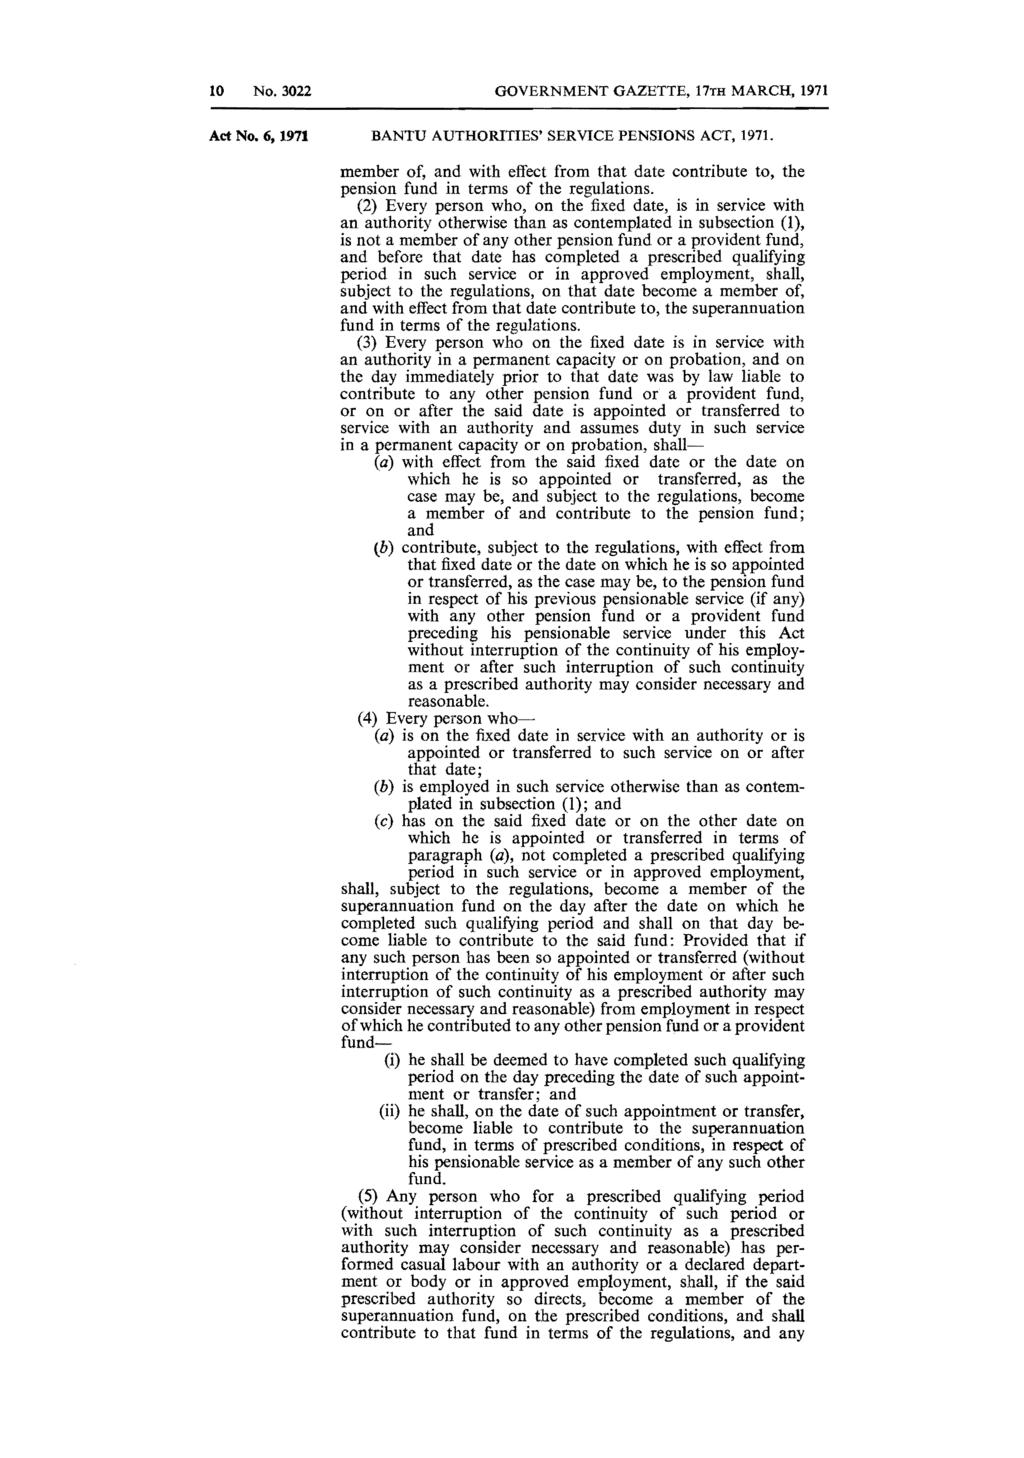 10 No. 3022 GOVERNMENT GAZETTE, 17TH MARCH, 1971 Act No.6, 1971 BANTU AUTHORITIES' SERVICE PENSIONS ACT, 1971.